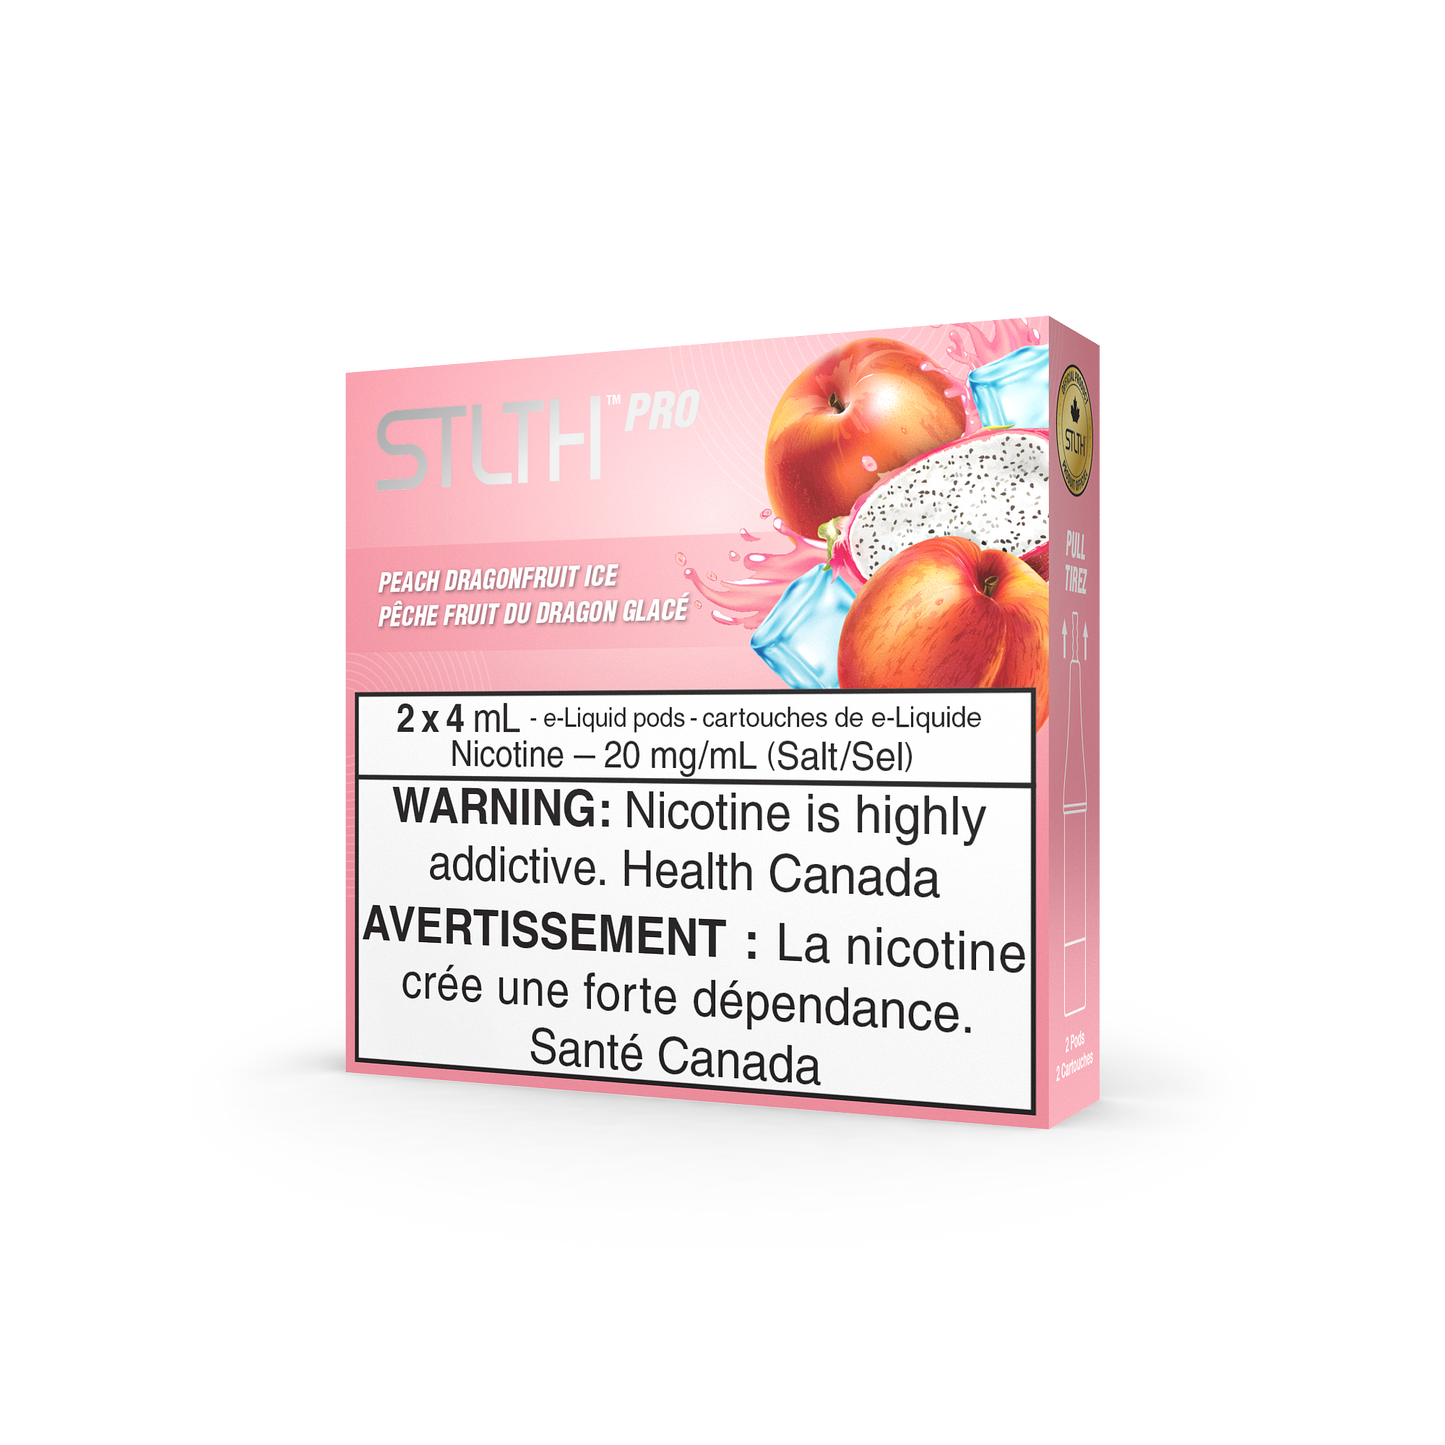 STLTH Pro - Peach Dragonfruit Ice (Pack of 5)